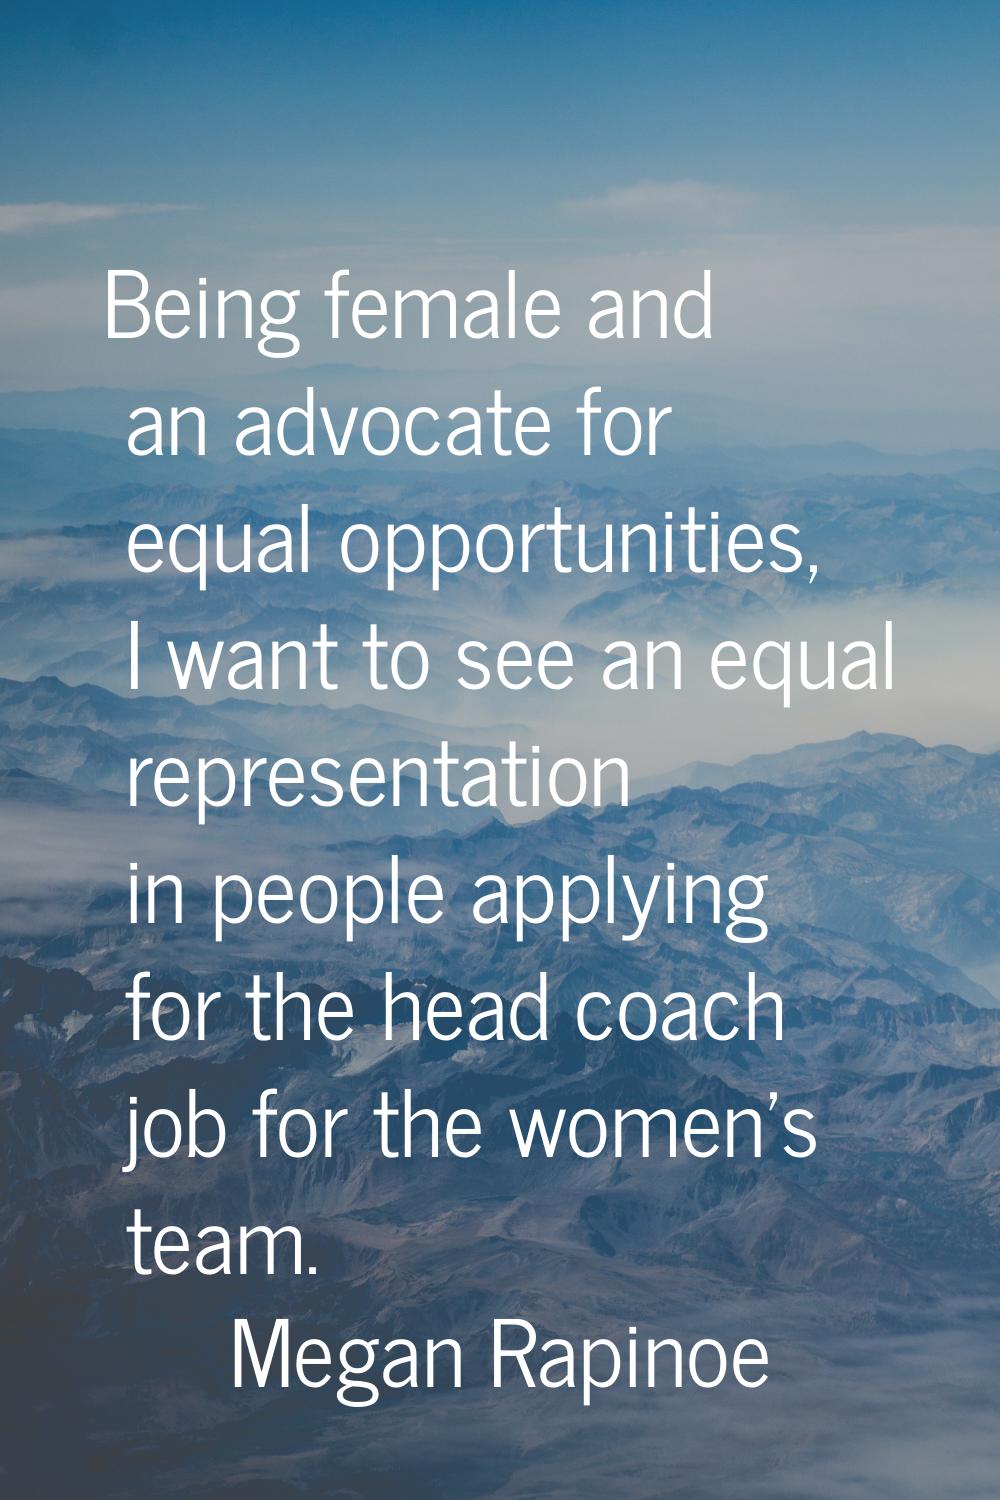 Being female and an advocate for equal opportunities, I want to see an equal representation in peop